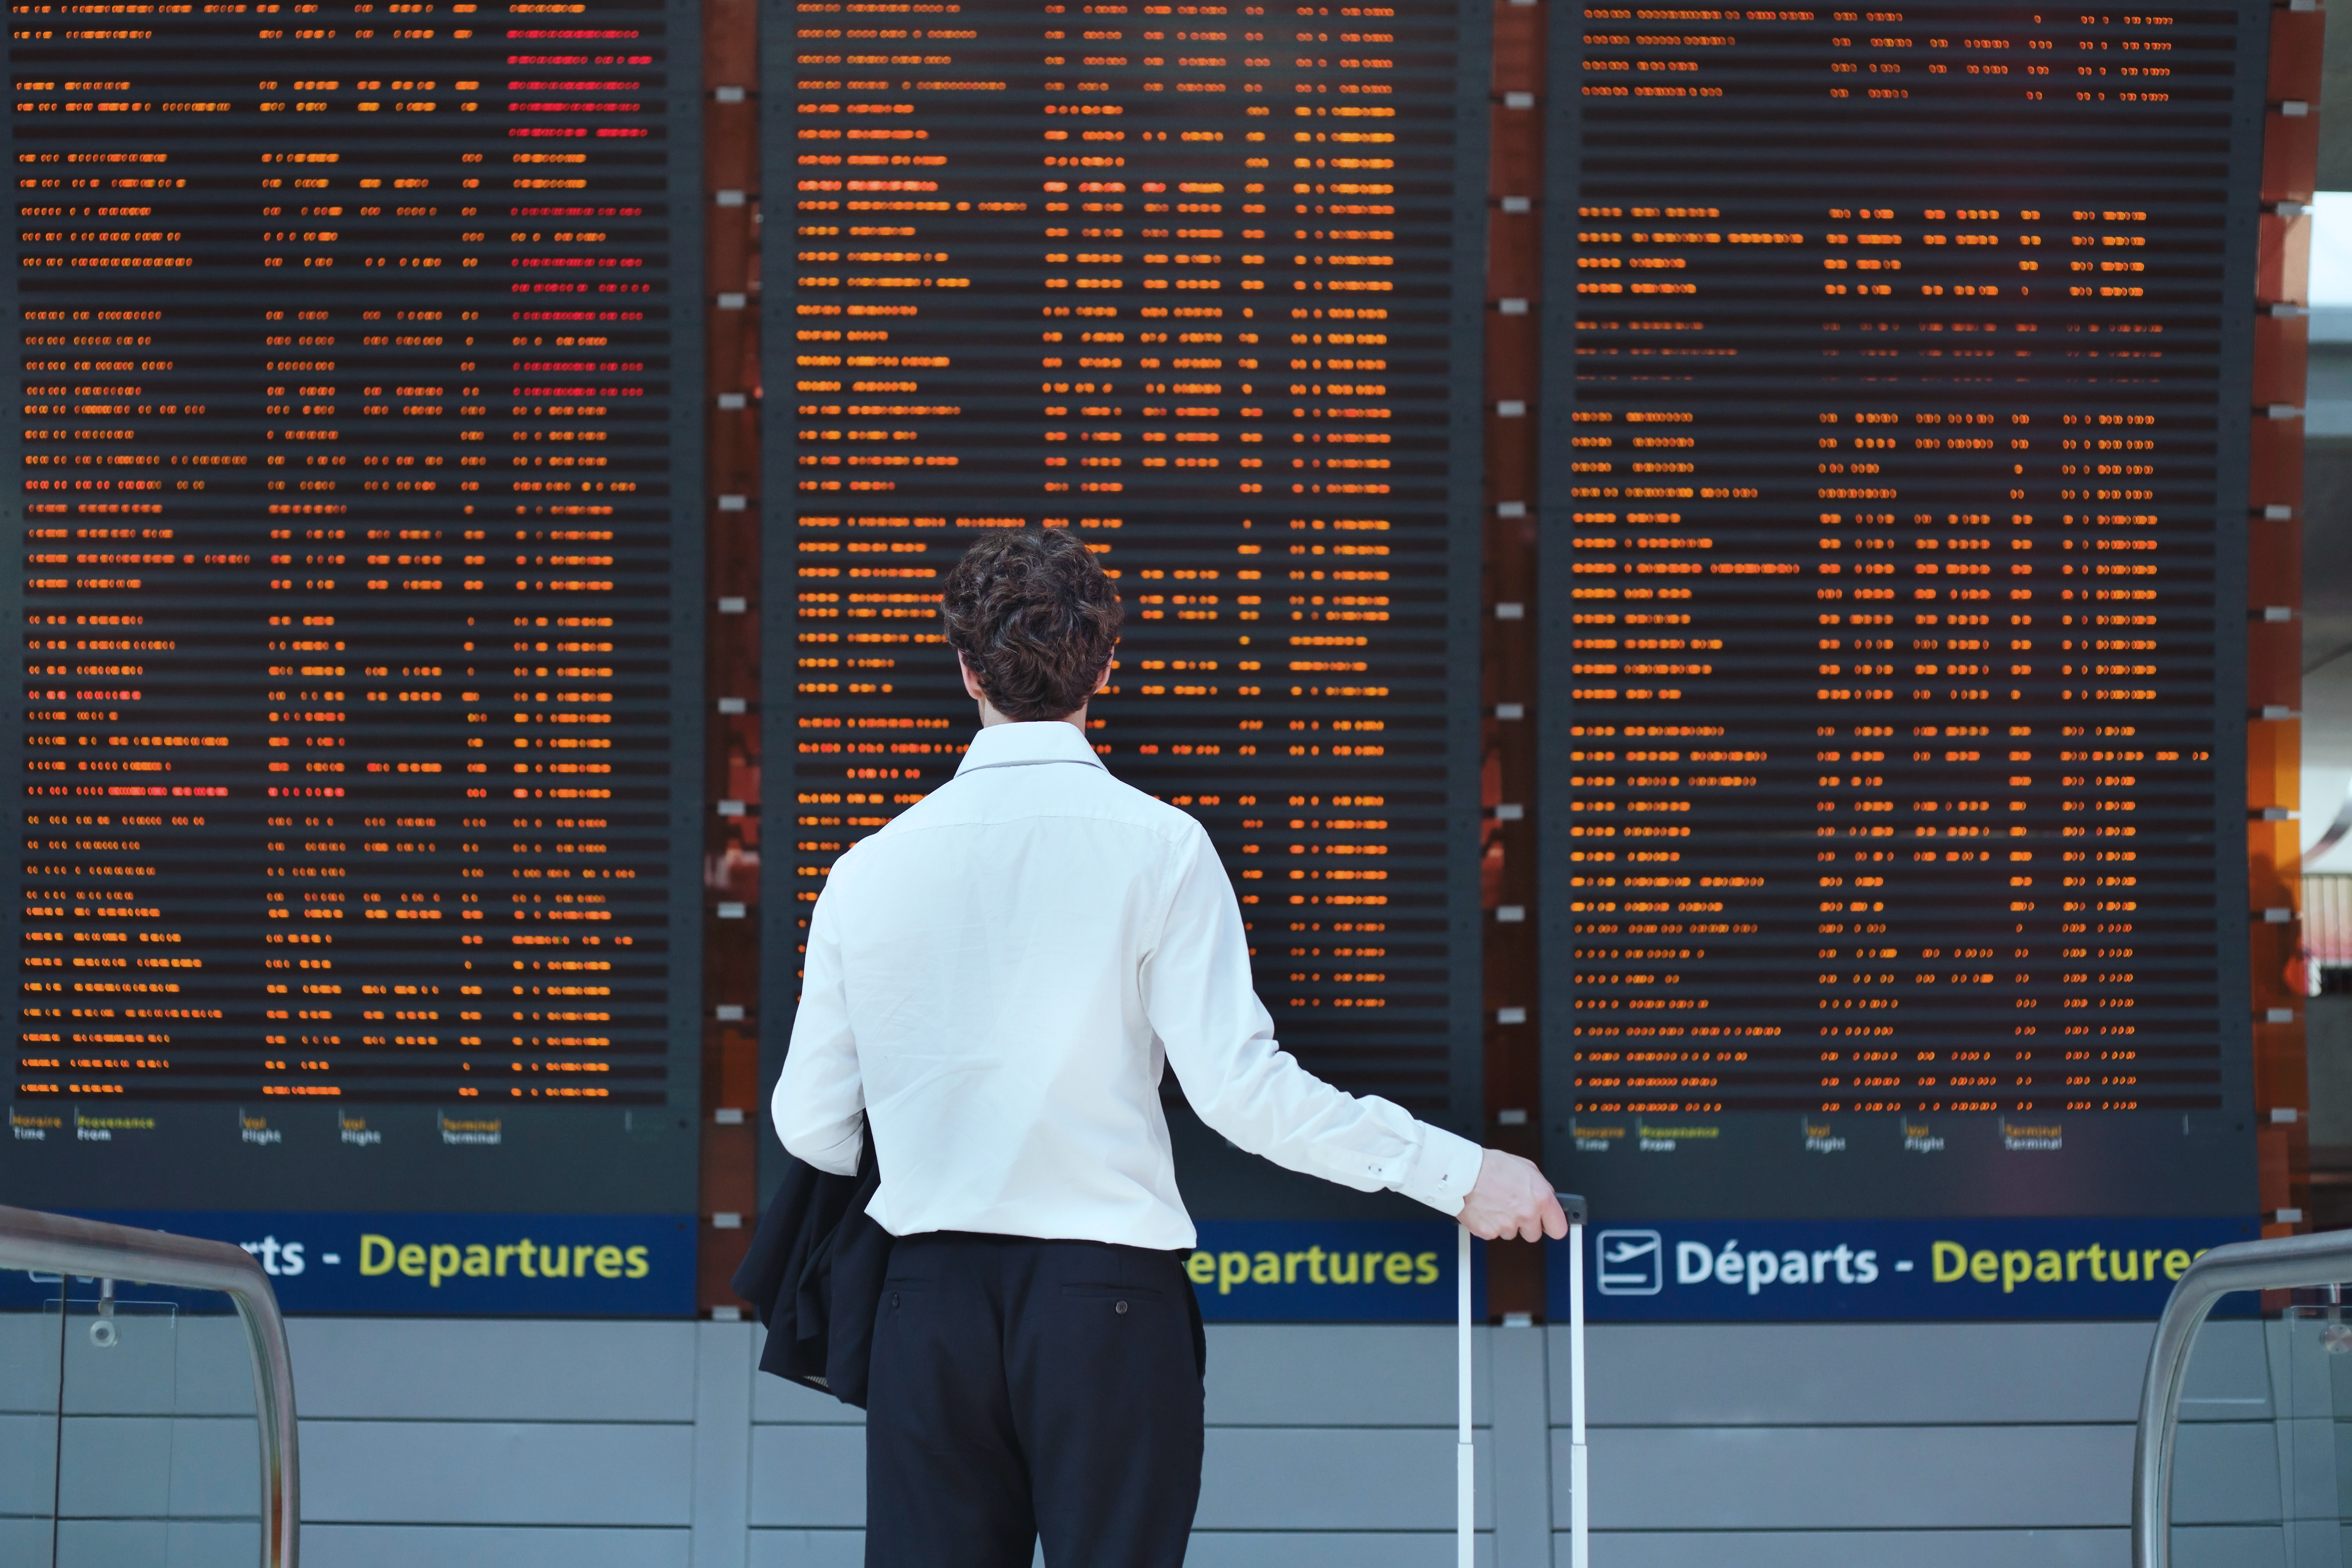 BBC report reveals which flights, airlines and airports have the most delays | FairPlane UK image